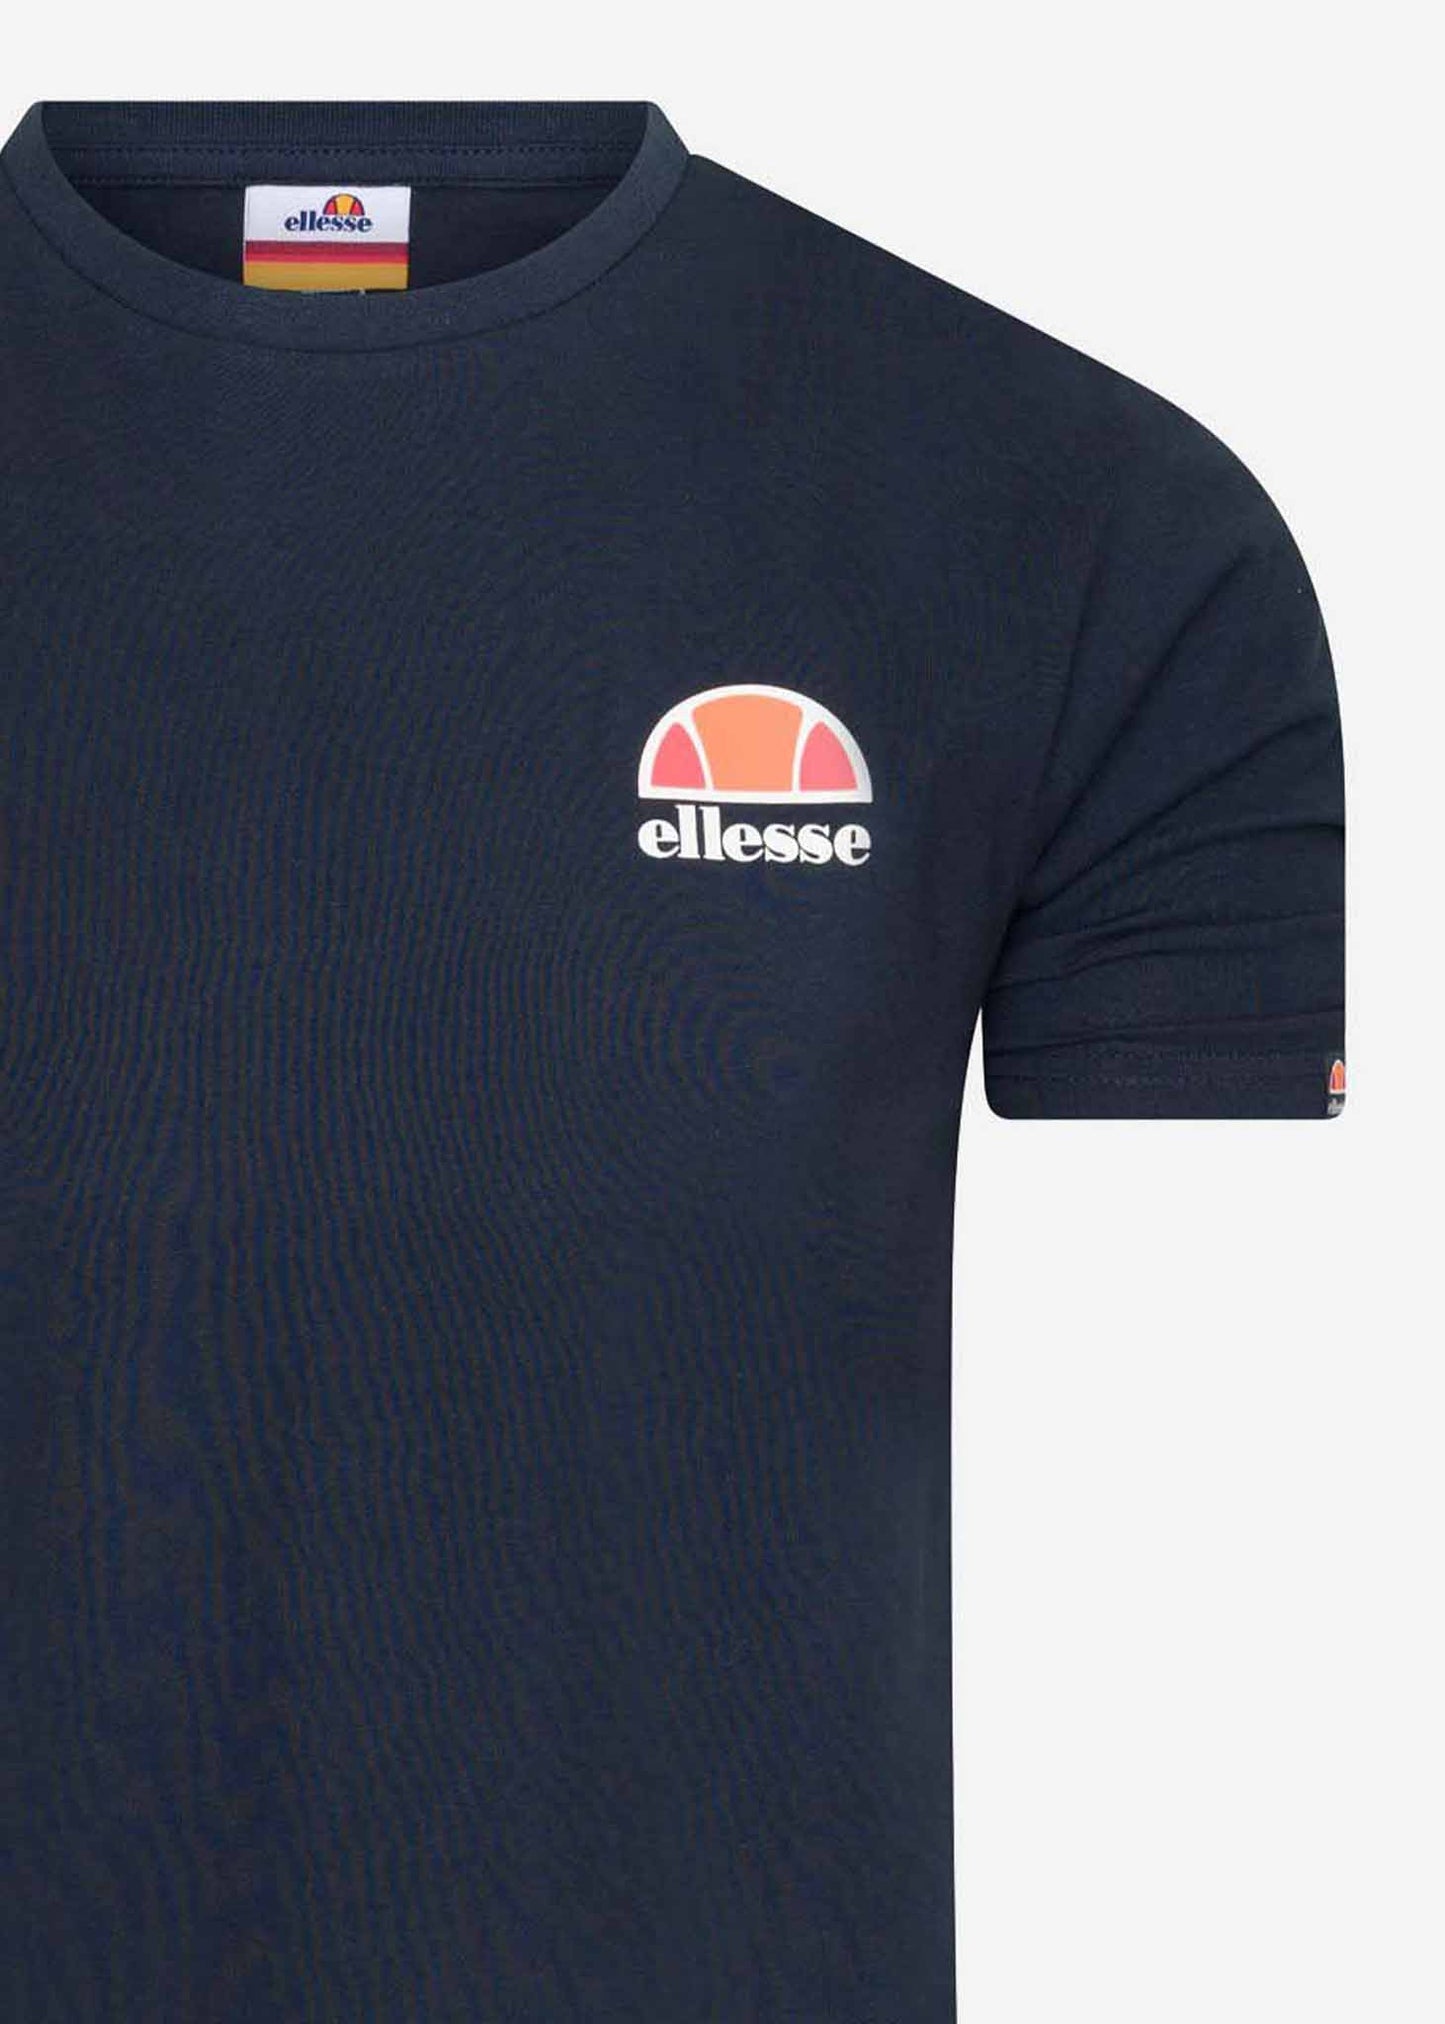 Canaletto tee - navy - Ellesse